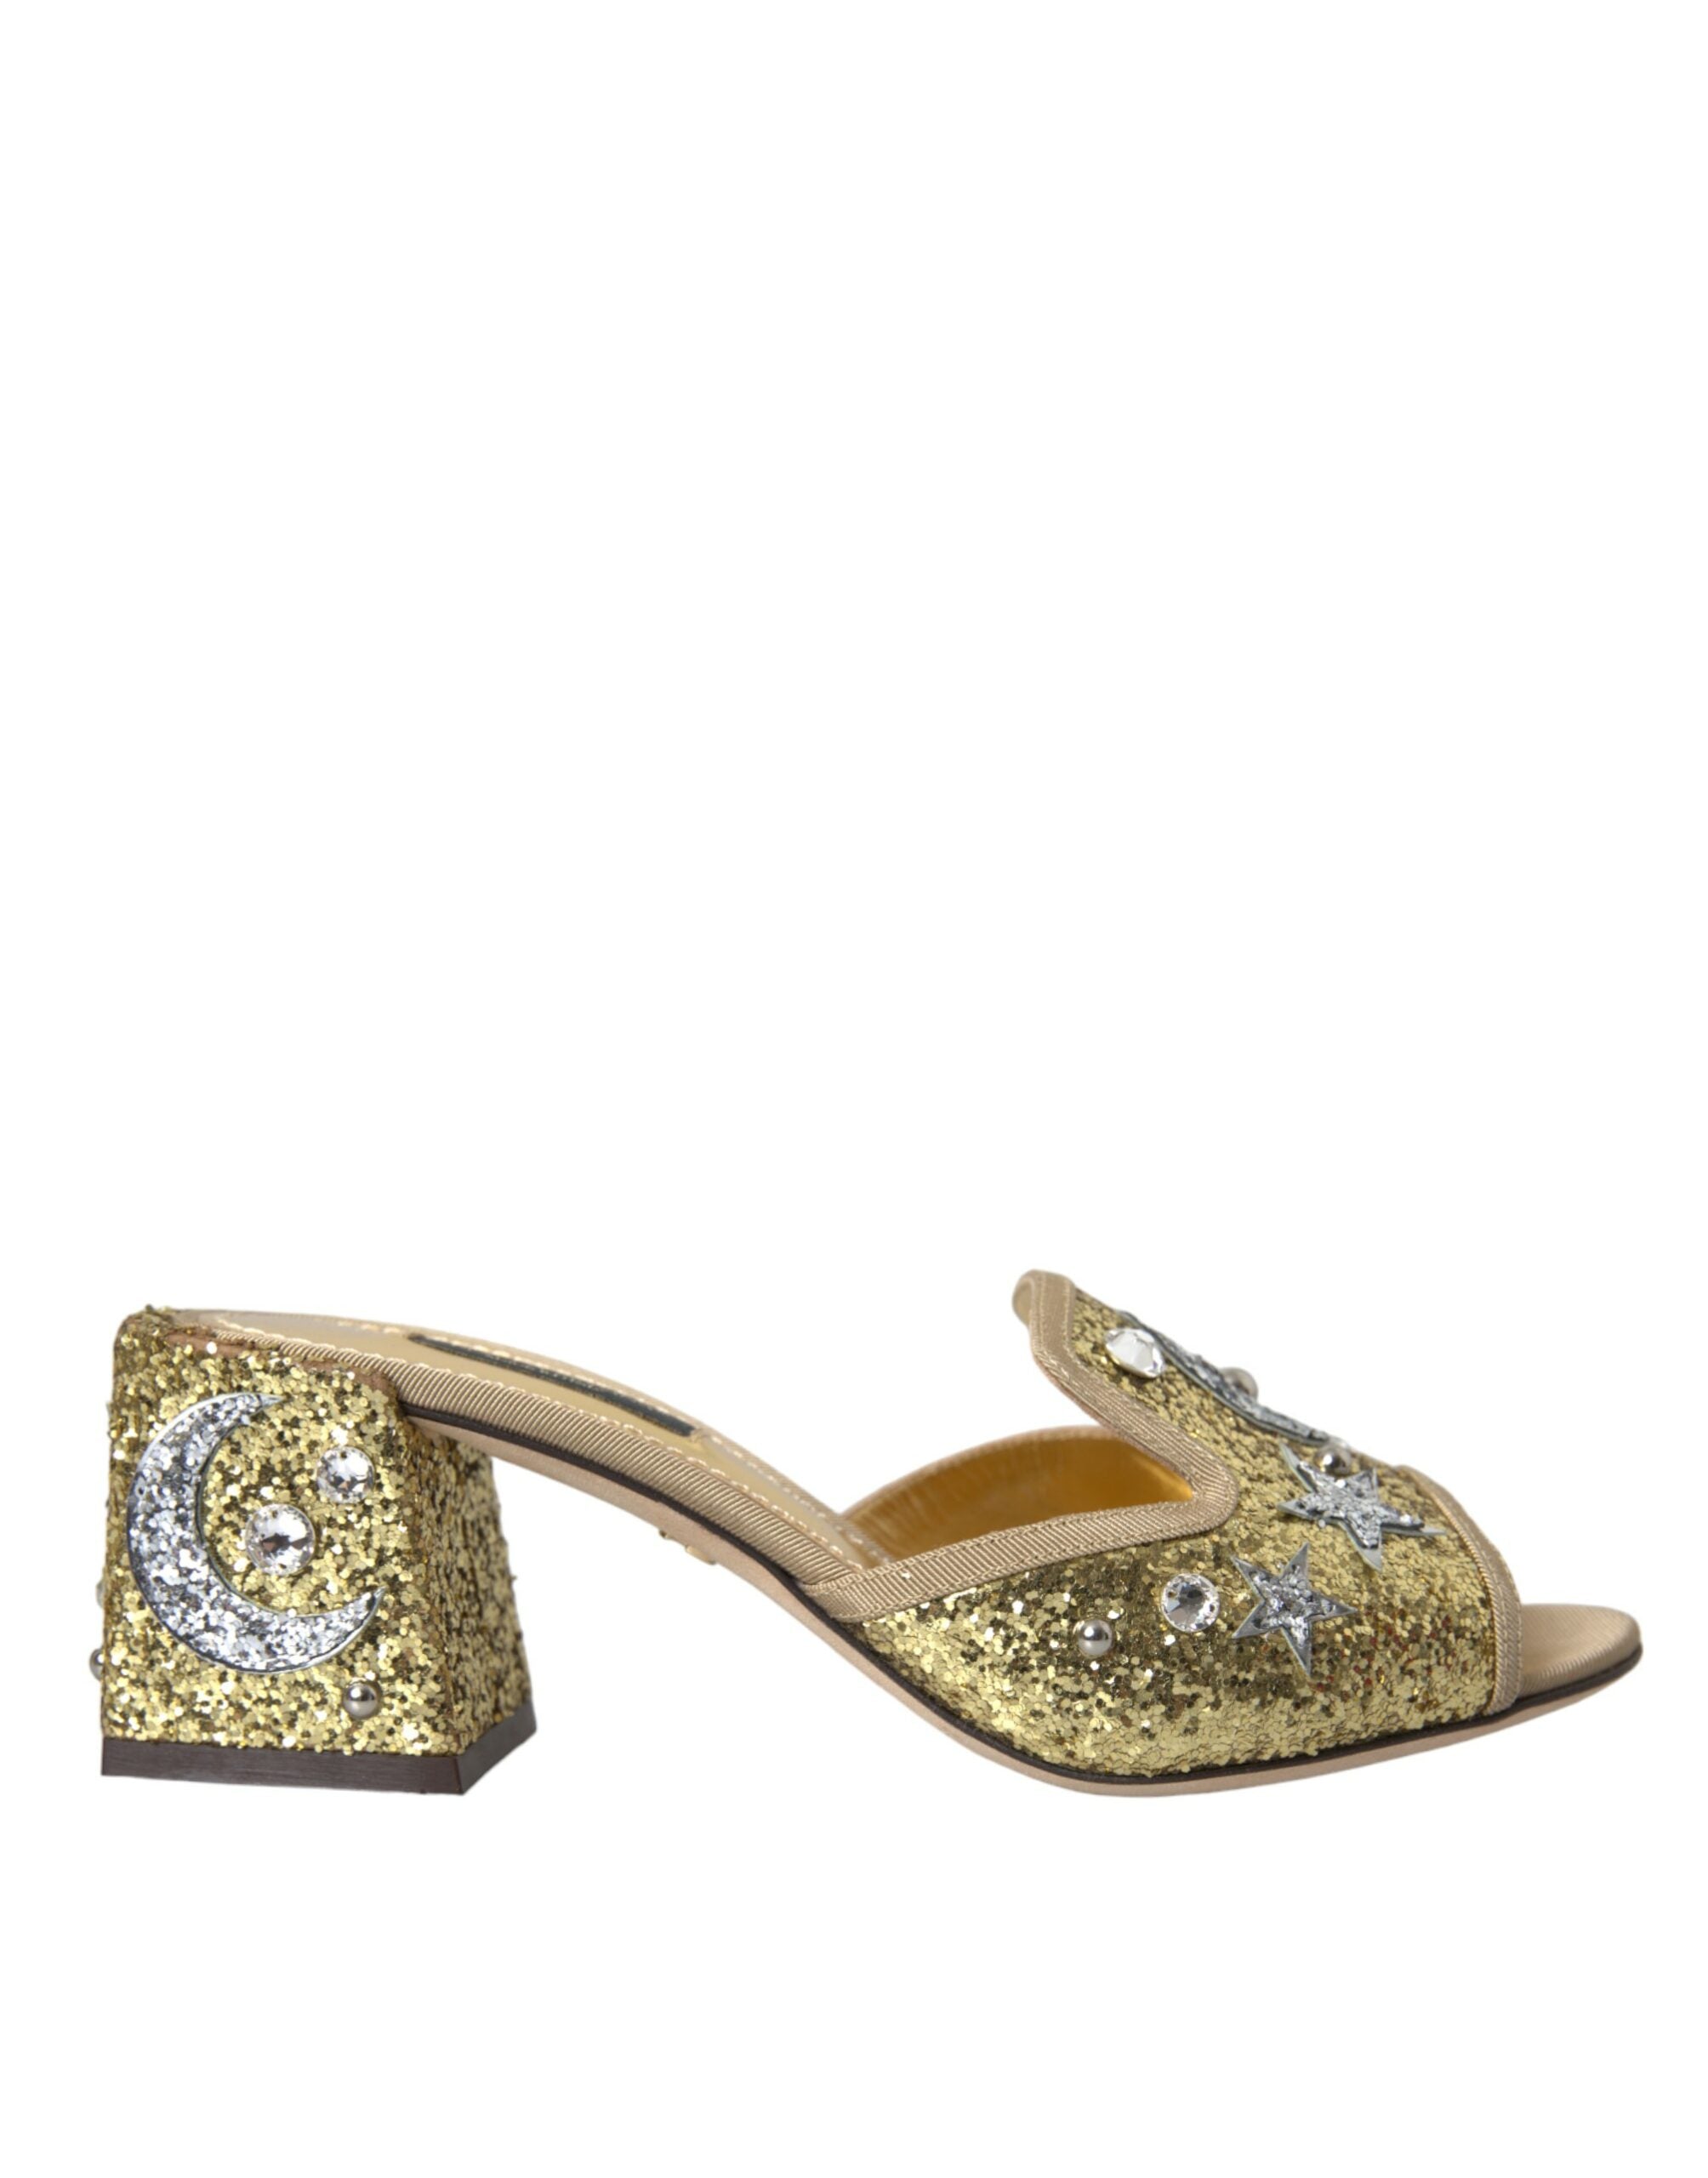 Gold Sequin Leather Heels Sandals Shoes - Divitiae Glamour